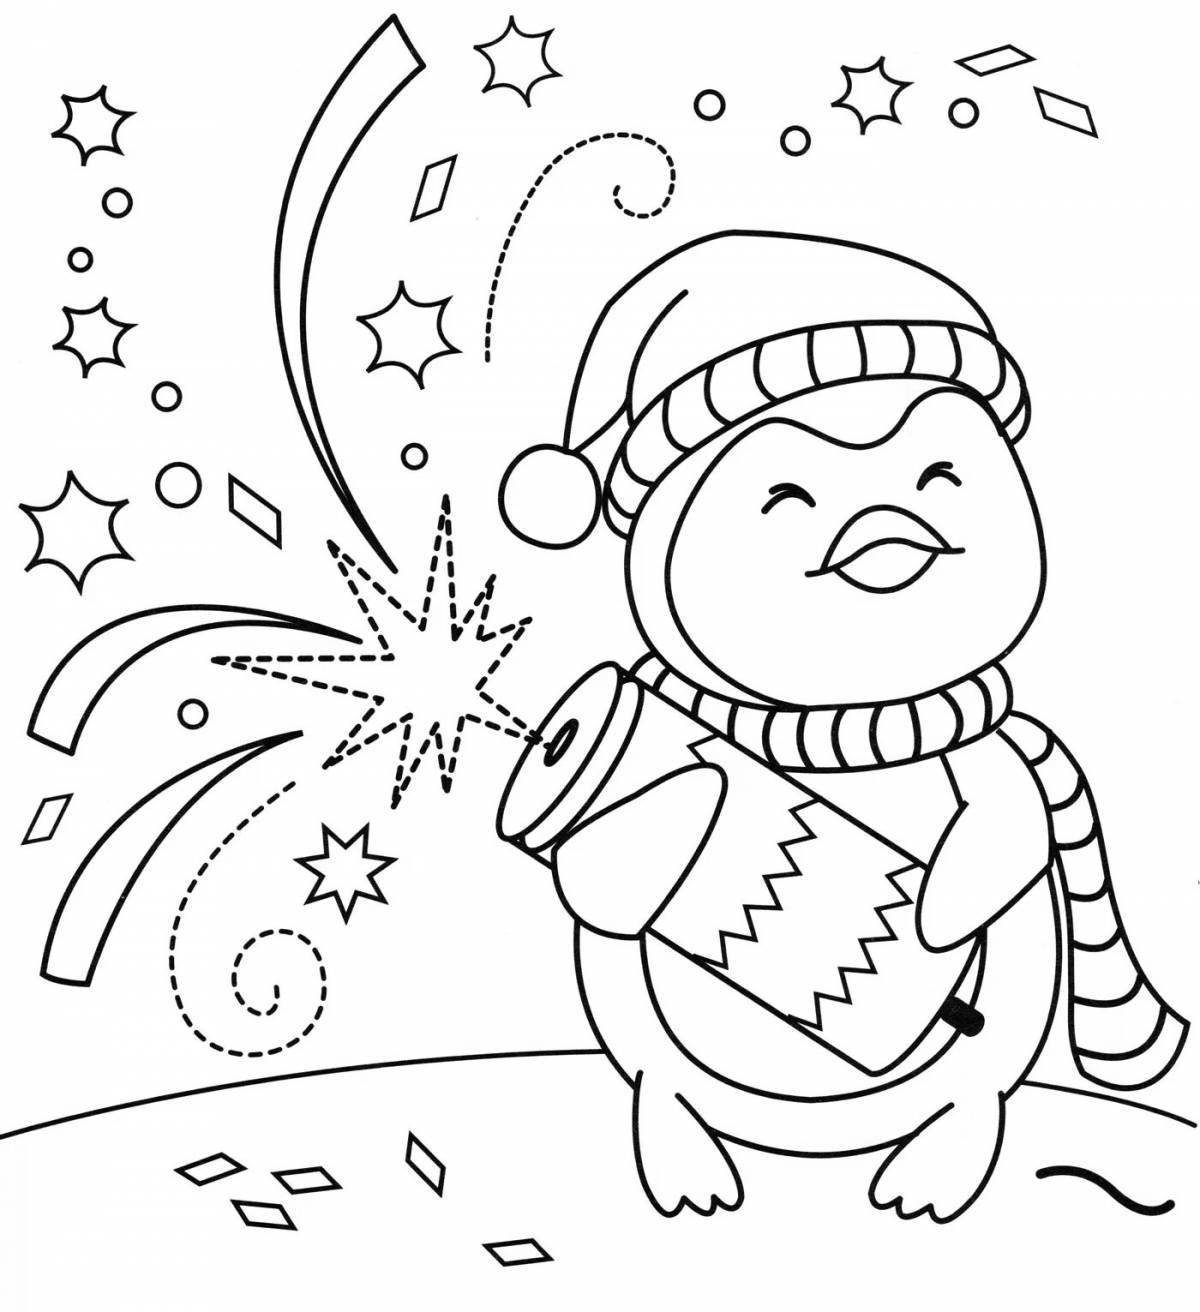 Inspiring baby flapper coloring book